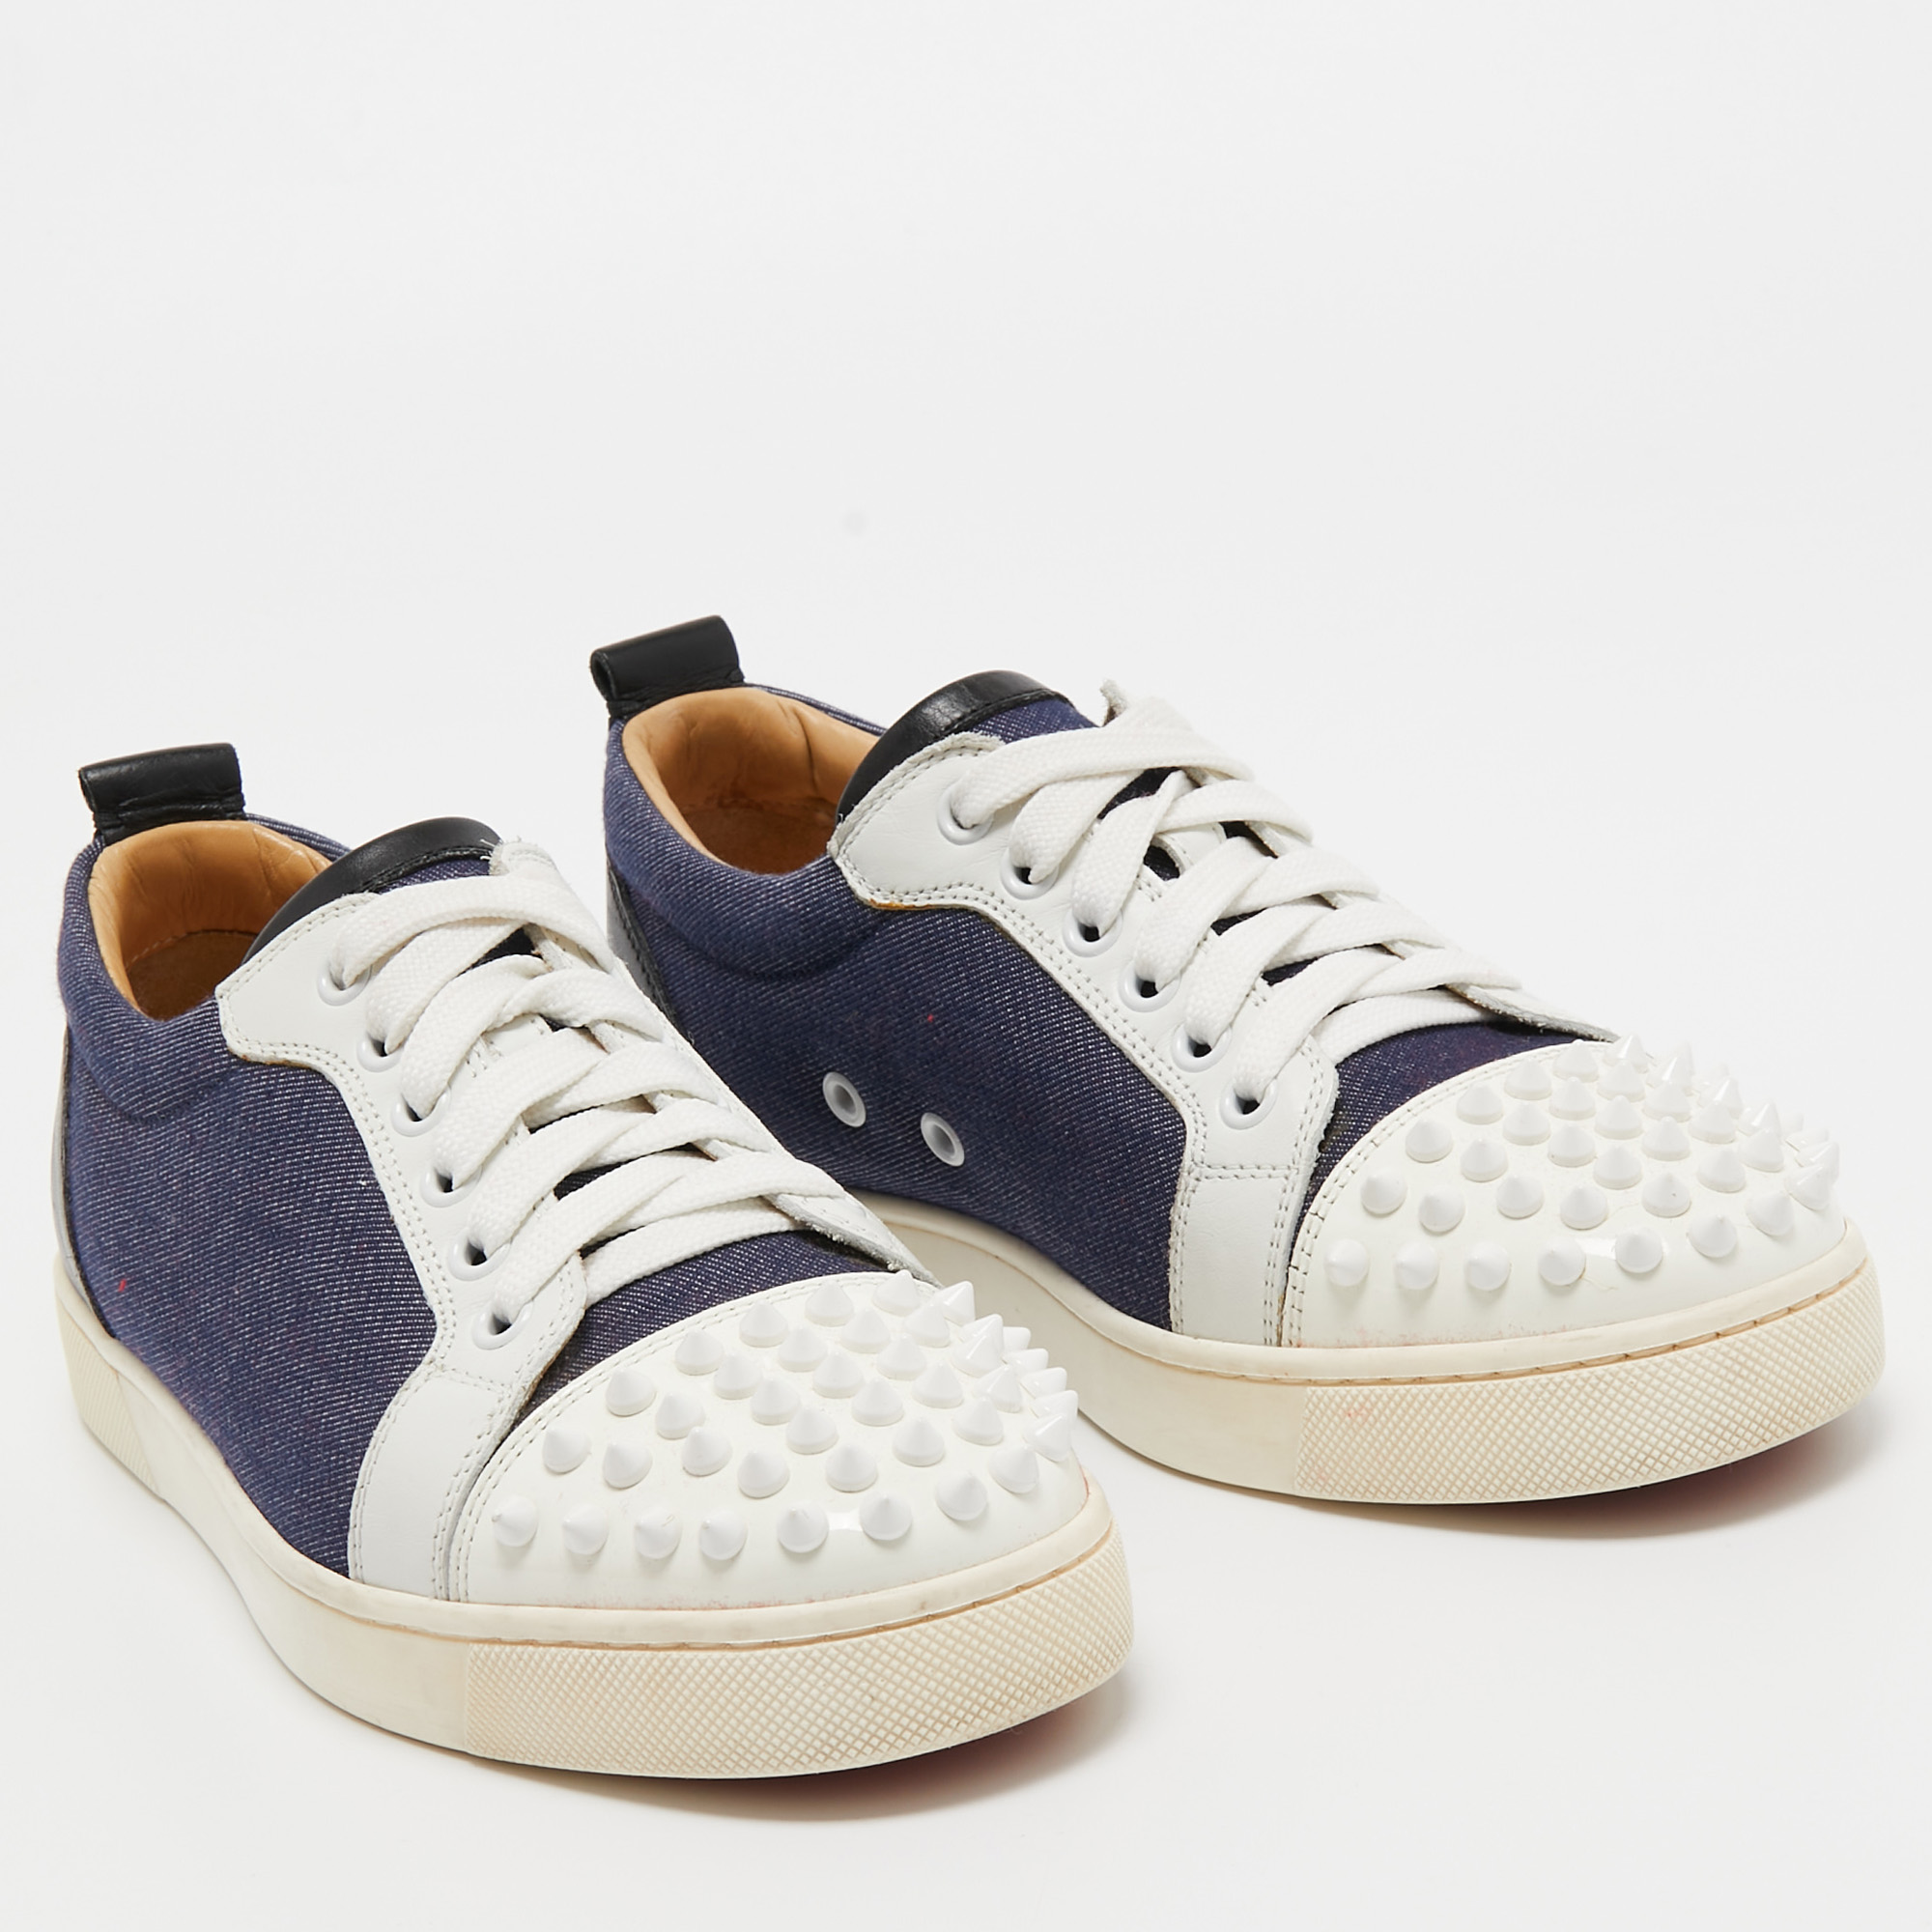 Christian Louboutin Blue/White Denim And Leather Spikes Low Top Sneakers Size 37